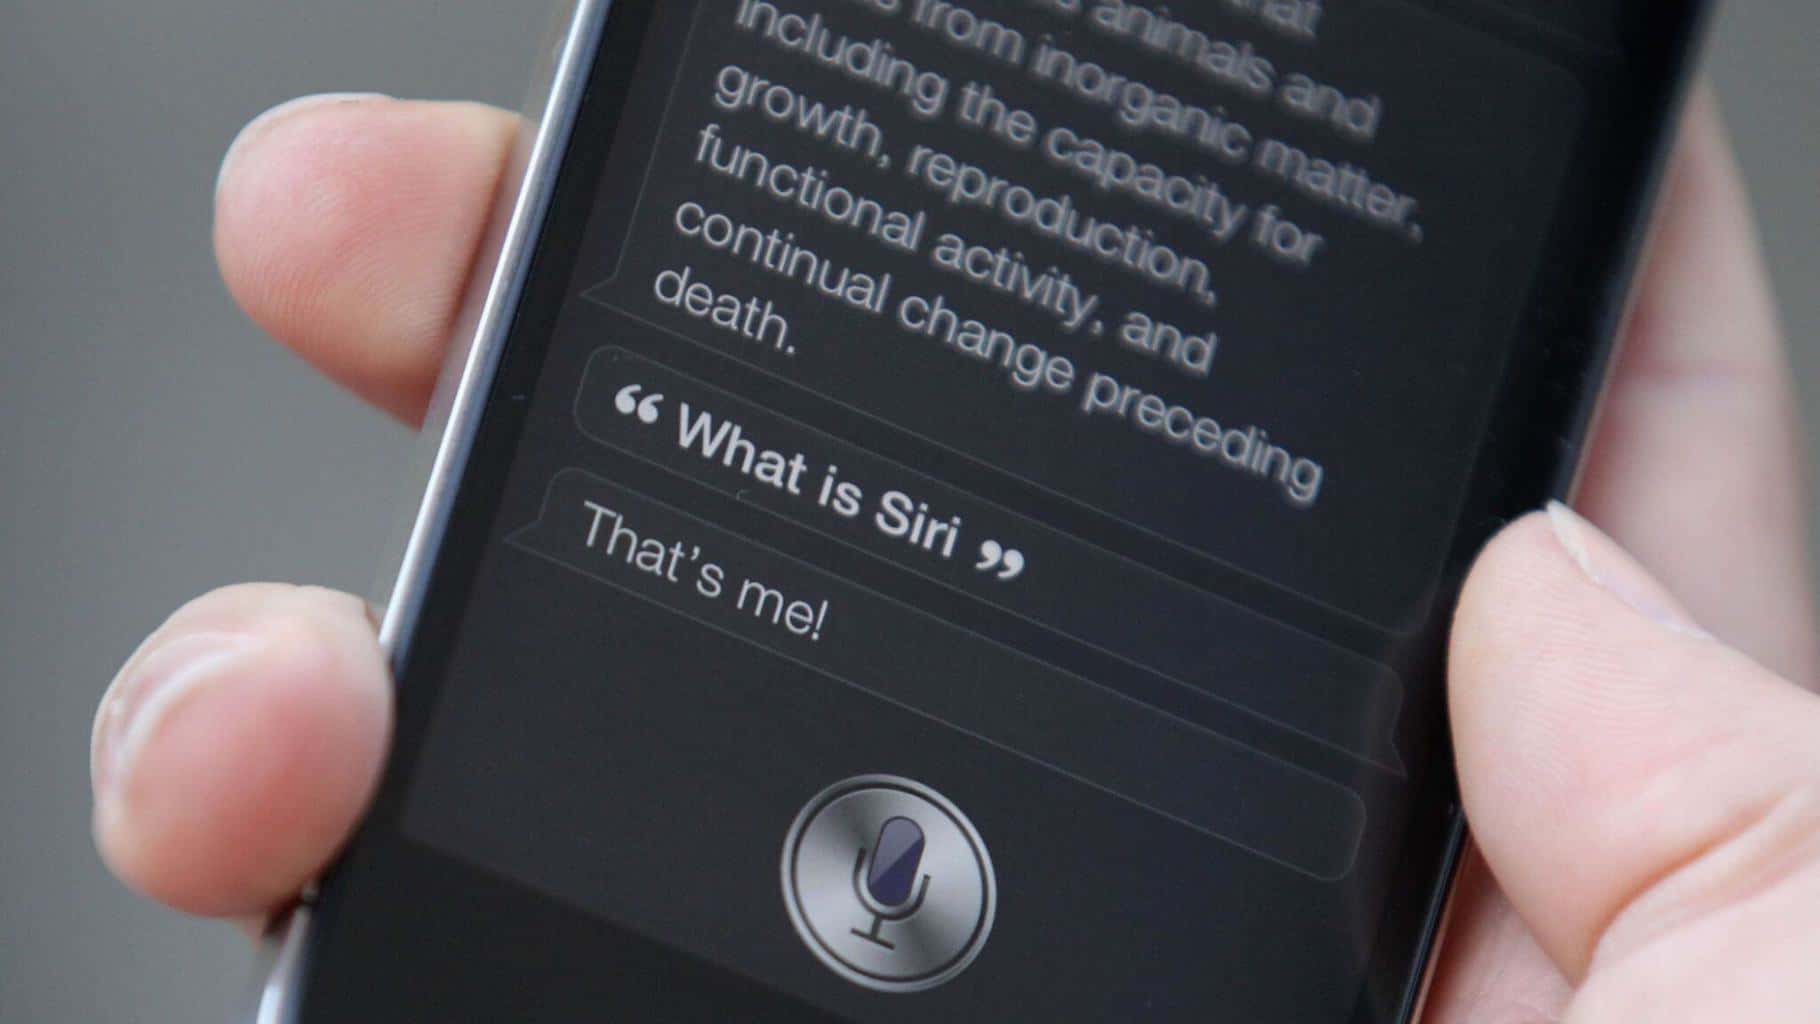 Apple Suspends Global Program for Siri Response Grading Owing to Privacy Issues